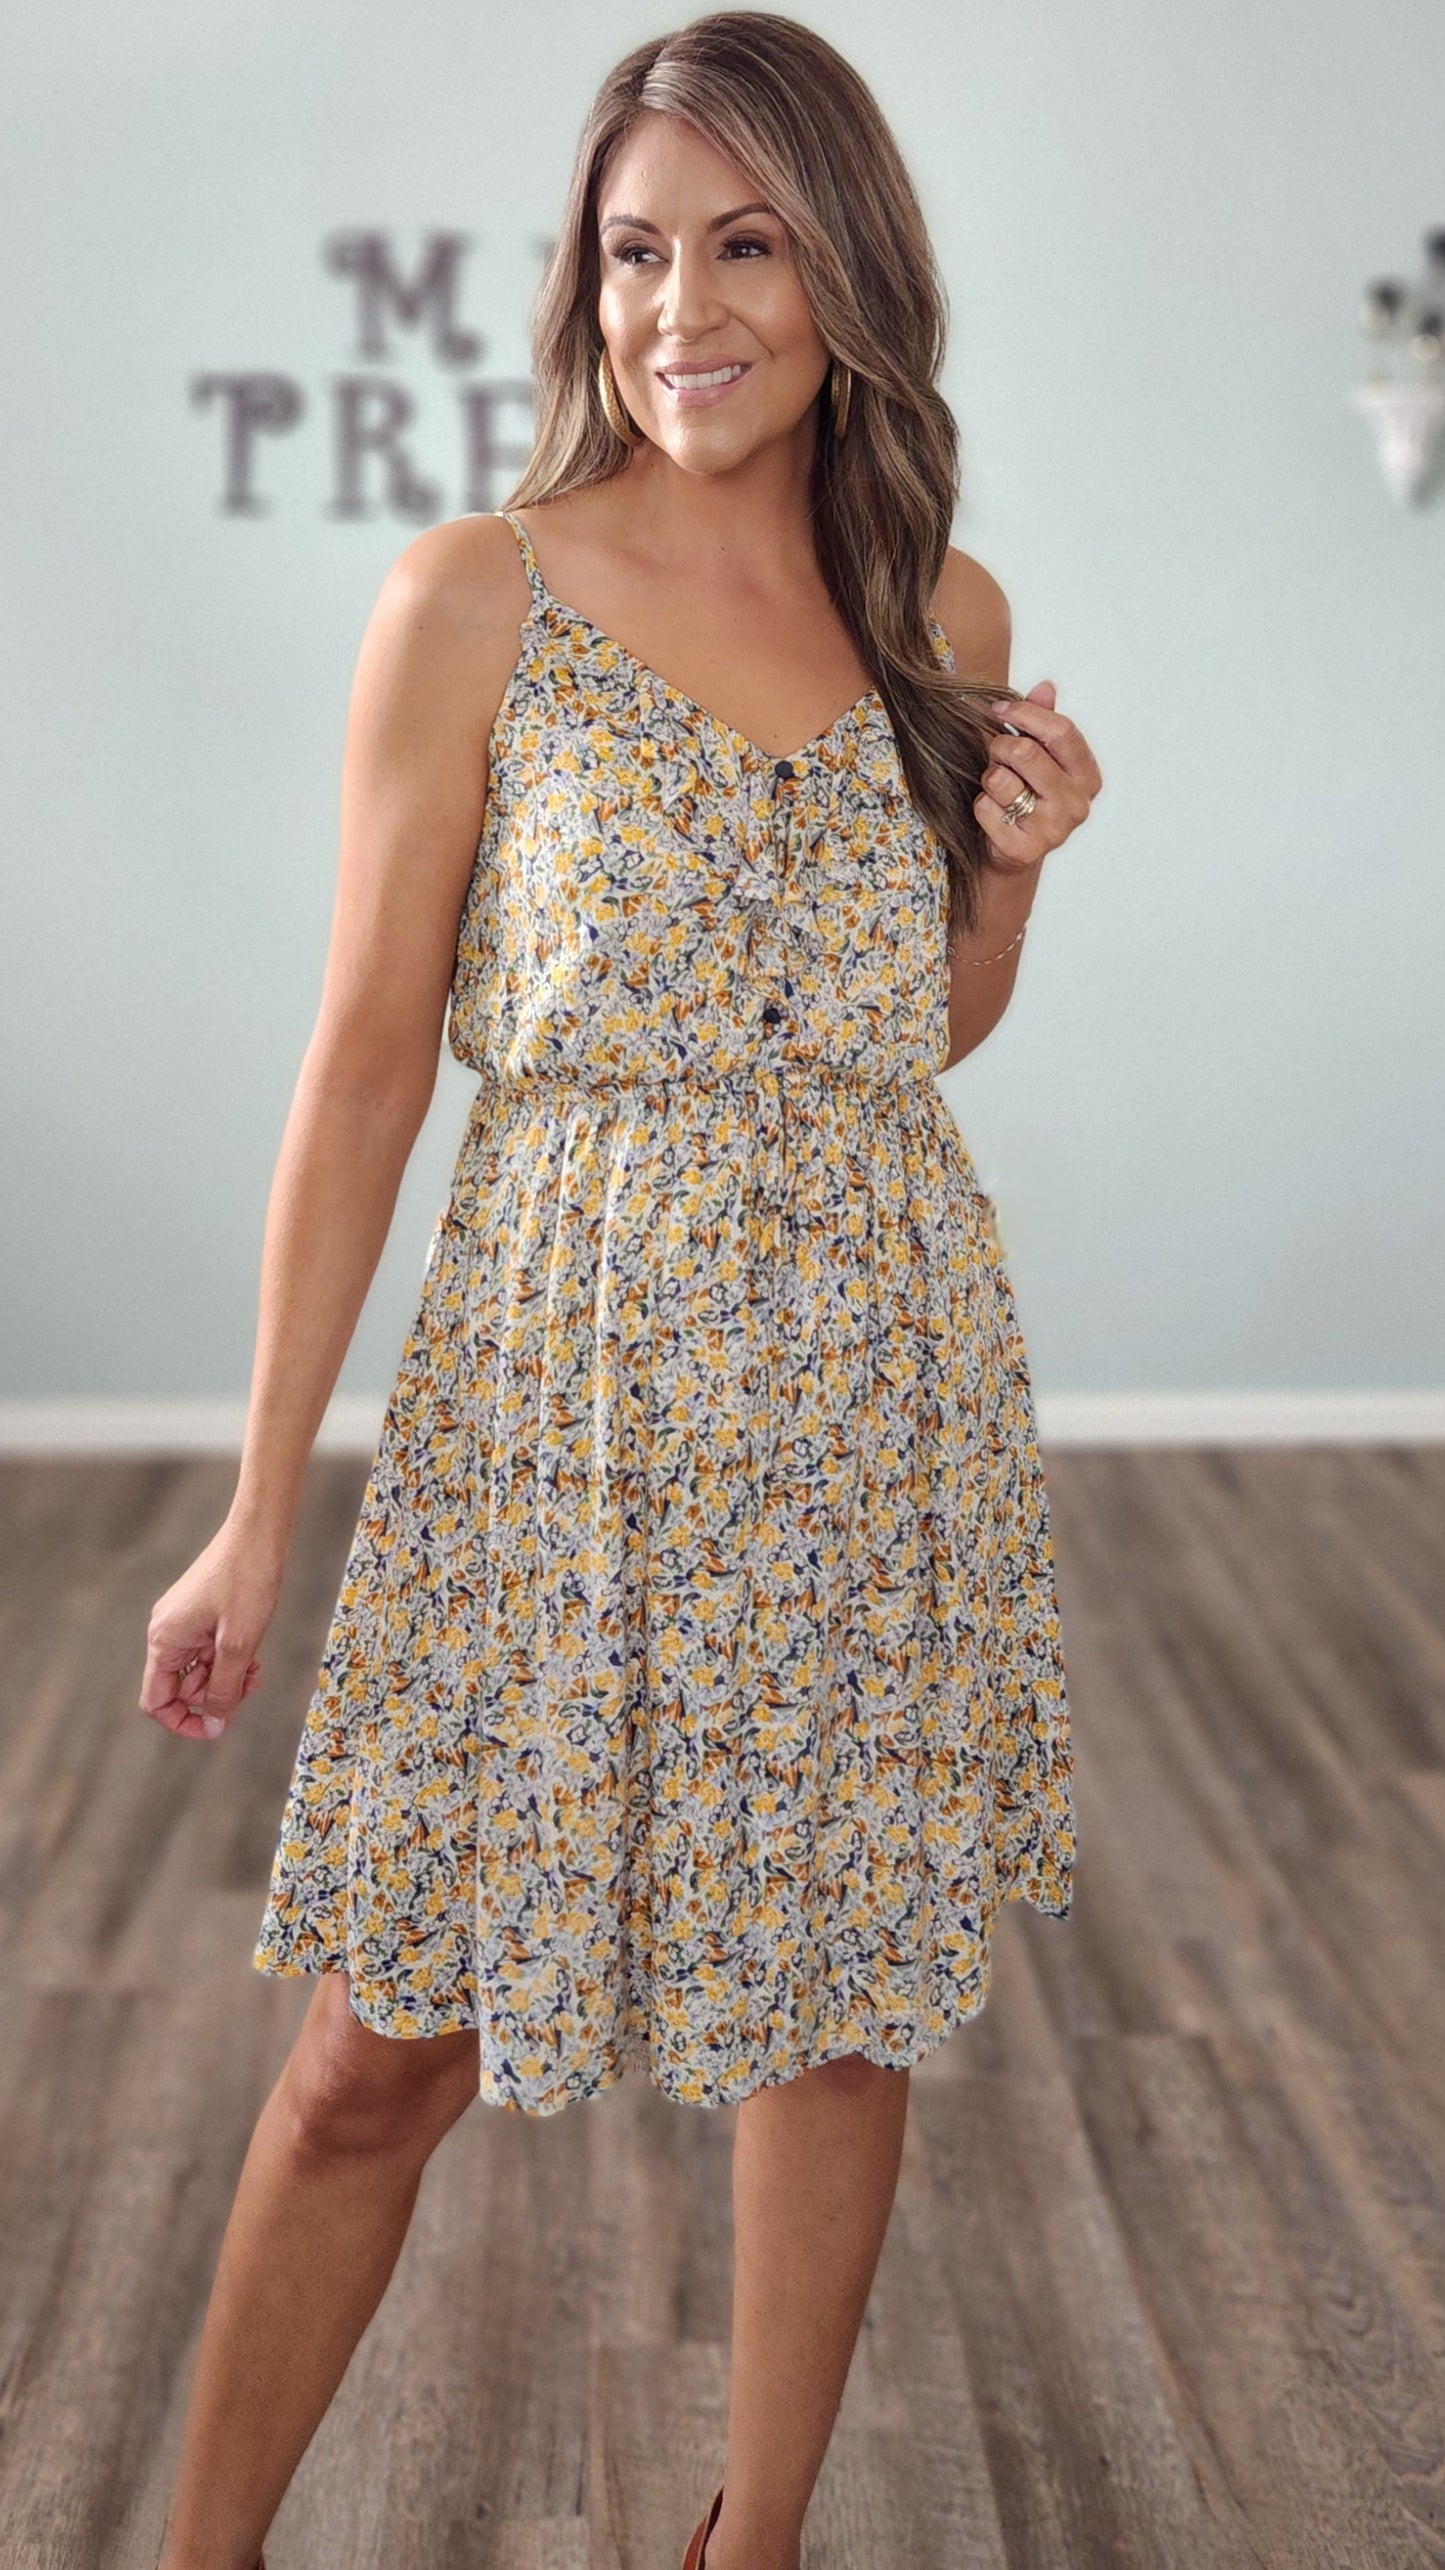 Fun and Fabulous Dress-Floral/ Multi-color